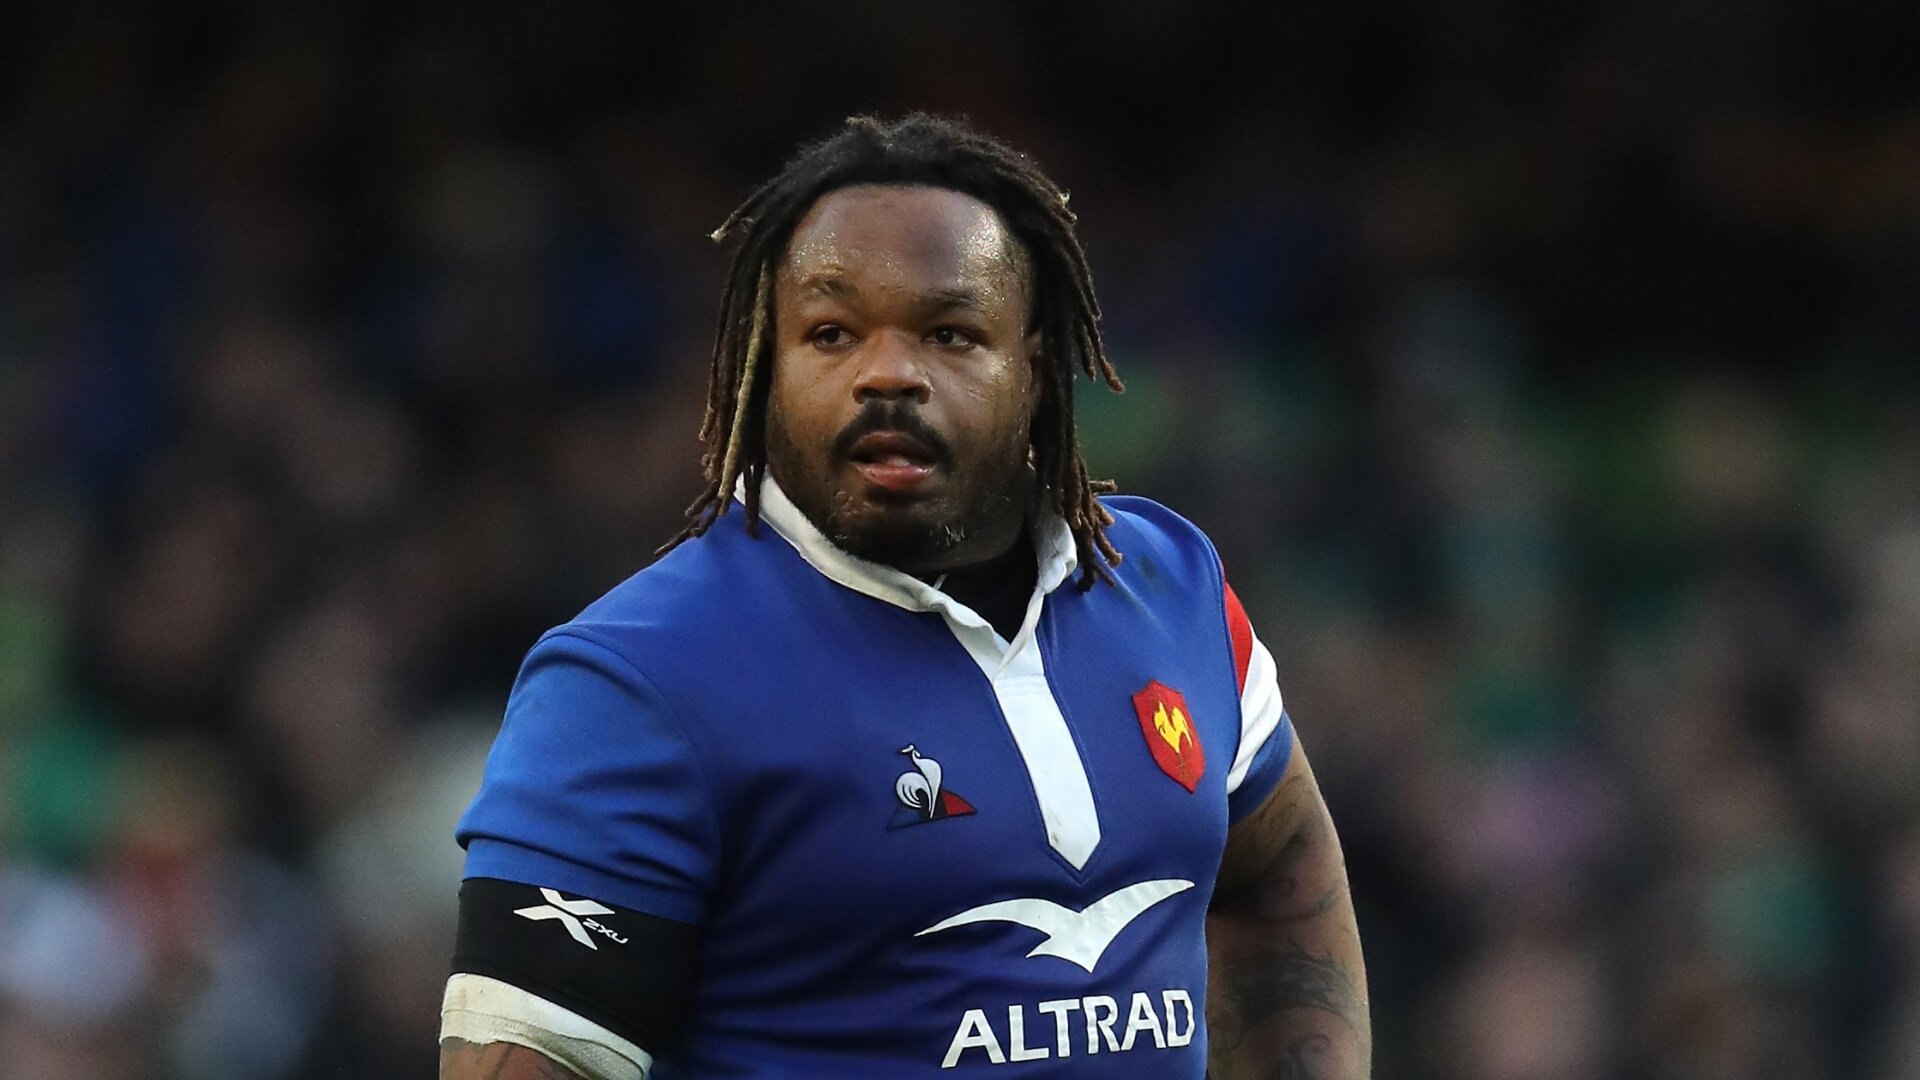 Bastareaud spotted at Lyon's training facility - reports